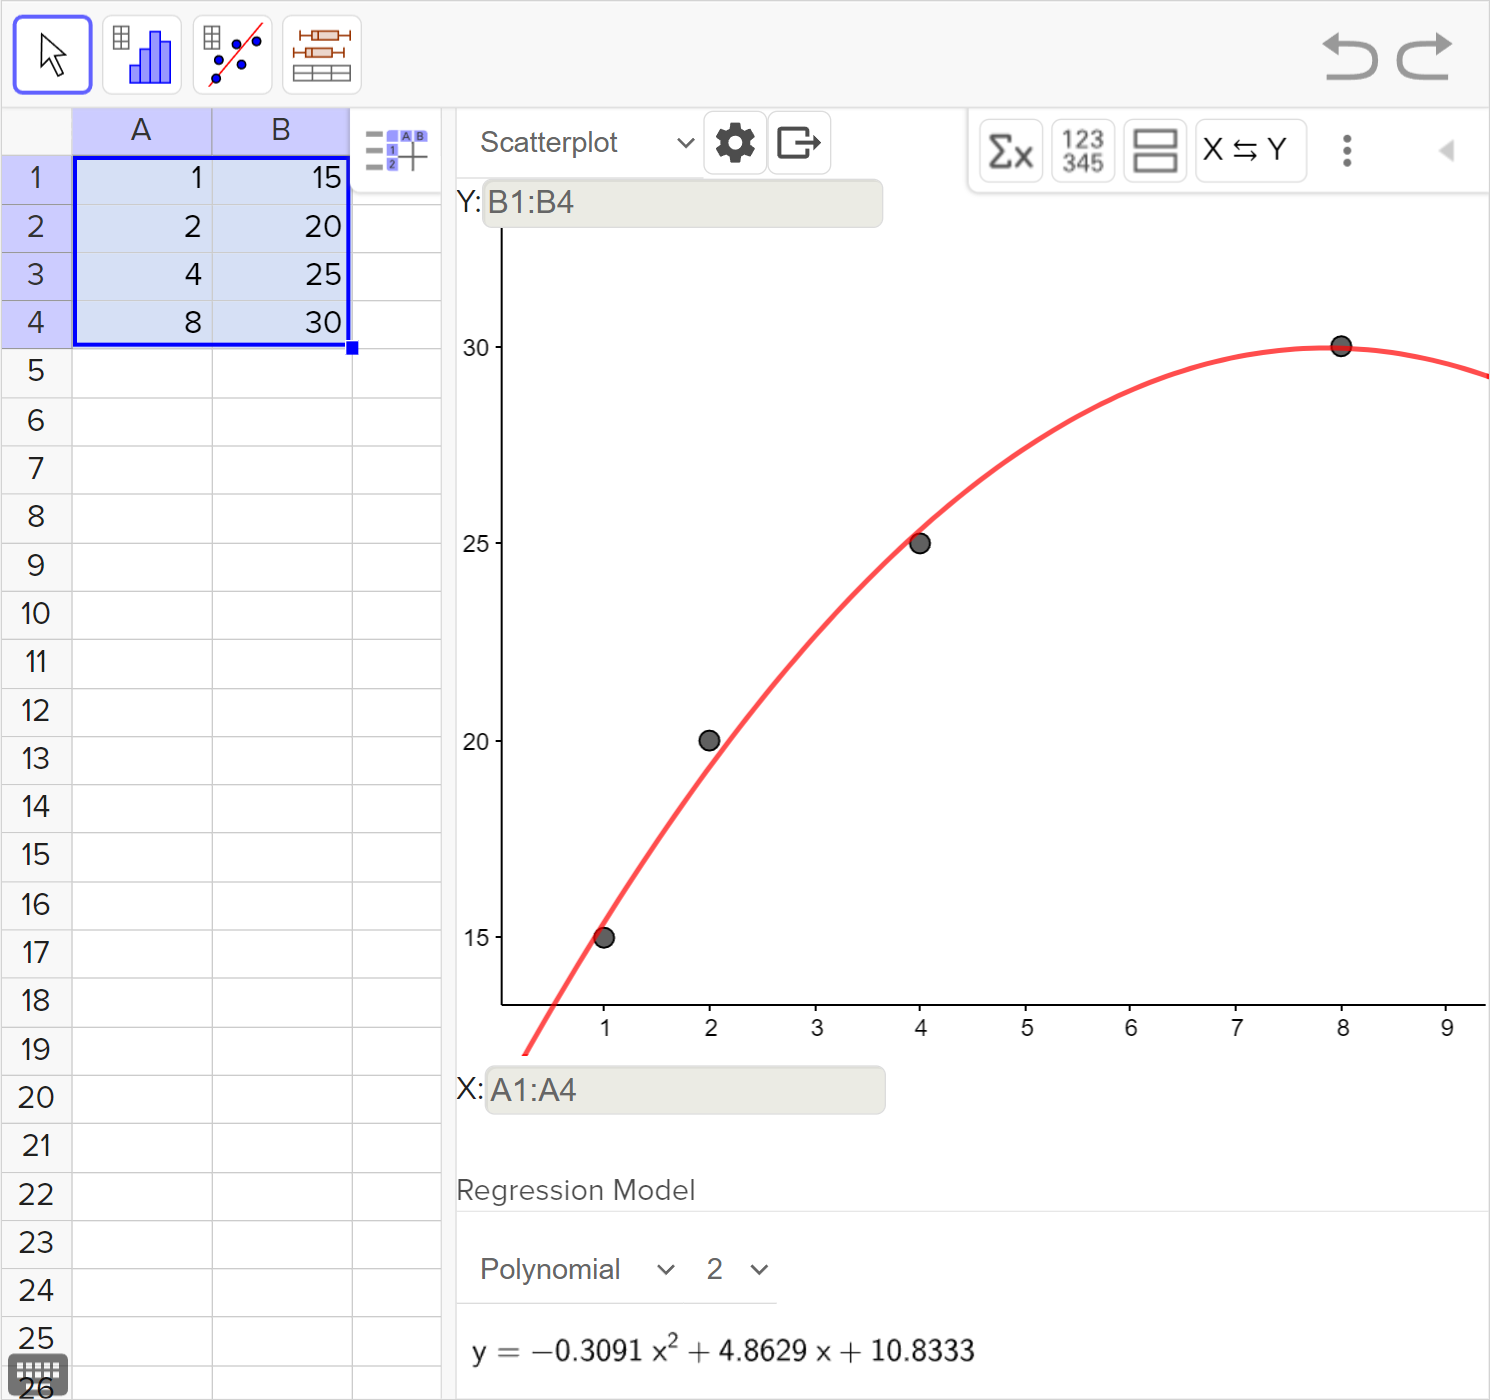 A screenshot of the GeoGebra statistics tool showing the following: On the left side: the numbers 1, 2, 4, and 8 entered in column A, rows 1 to 4, and 15, 20, 25, and 30 entered in column B, rows 1 to 4. The cells from column A, rows 1 to 4, and column B, rows 1 to 4, are selected. On the right side: a scatterplot and the best fit curve are shown. Speak to your teacher for more details.